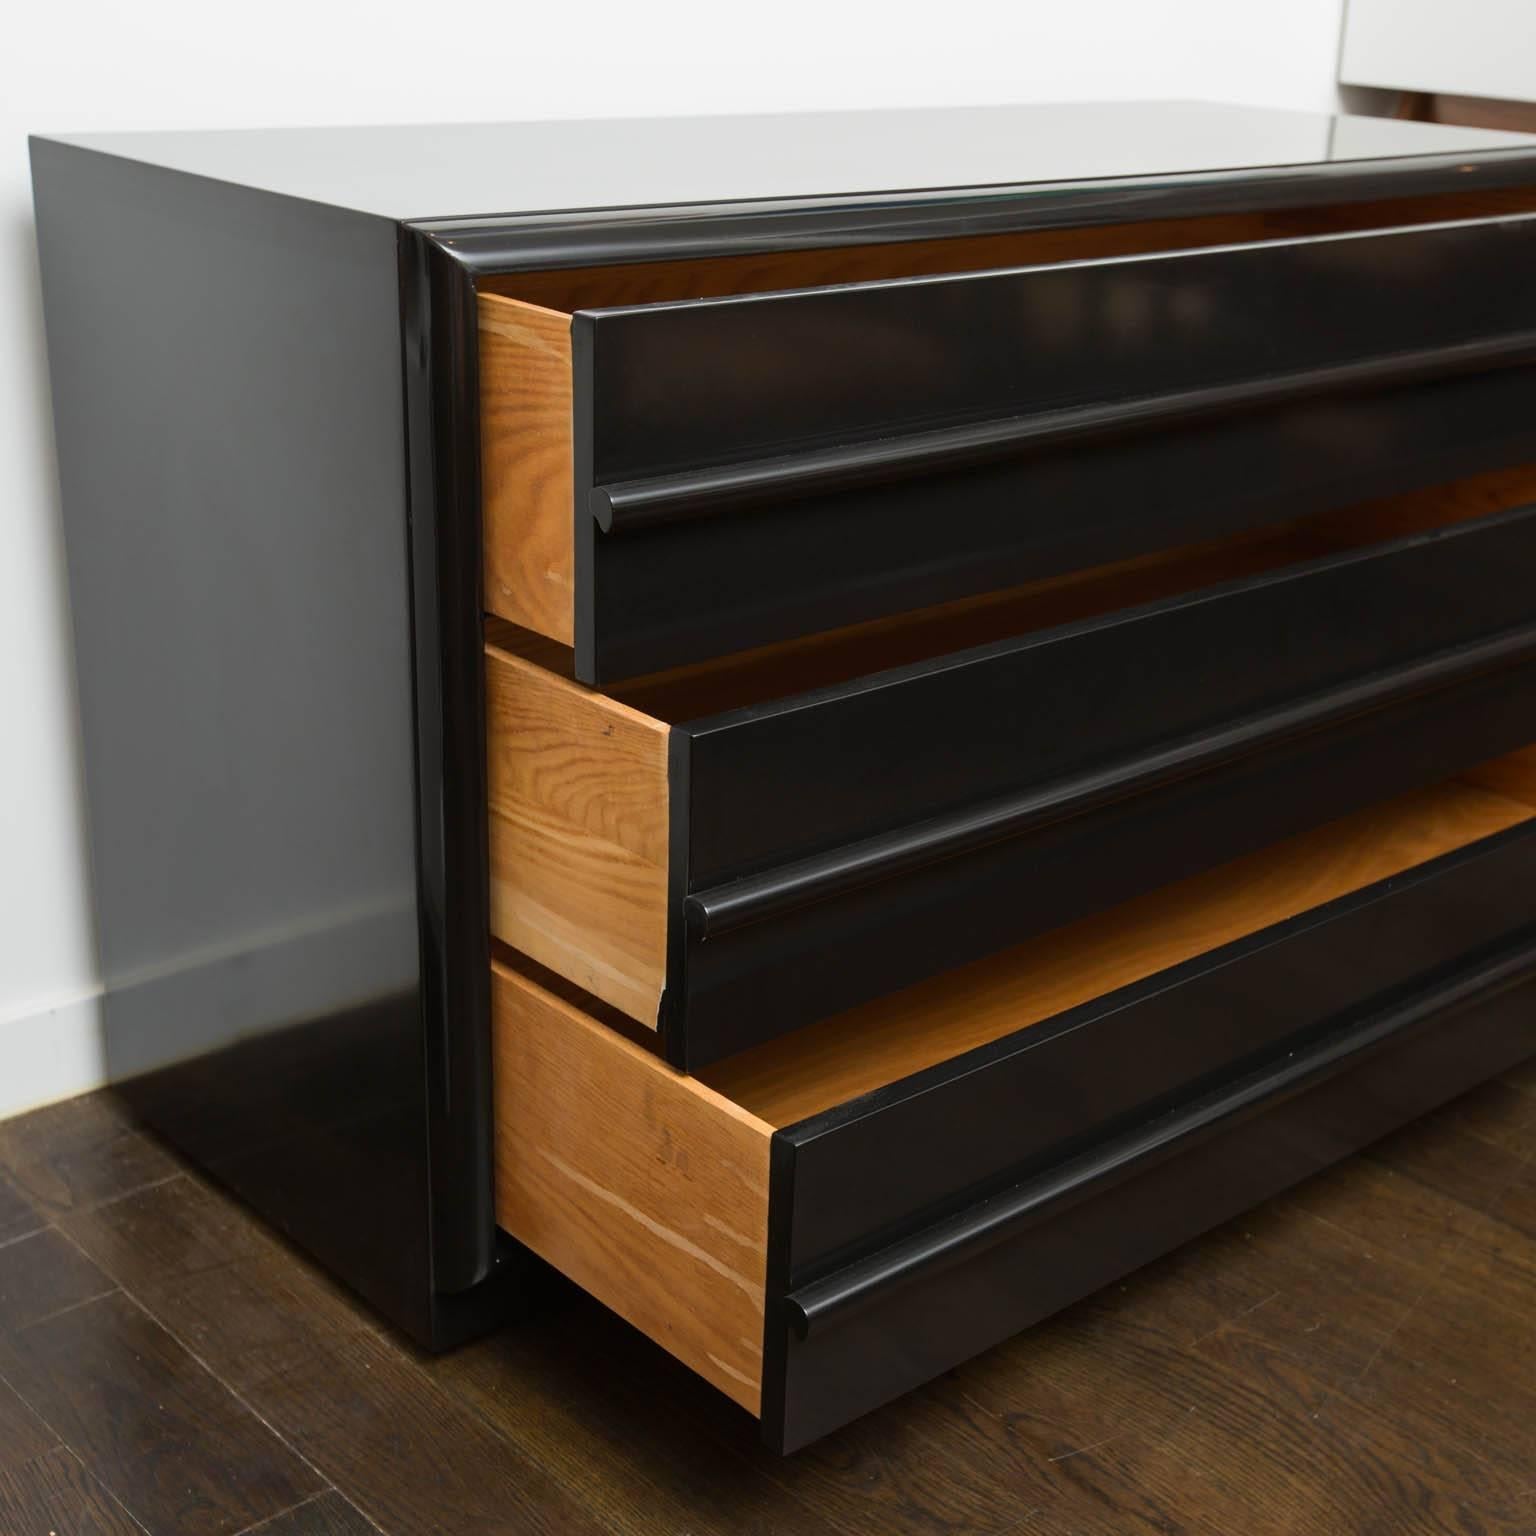 Freshly lacquered in high gloss ebony, this version of a long, three-drawer low dresser is rarely seen.